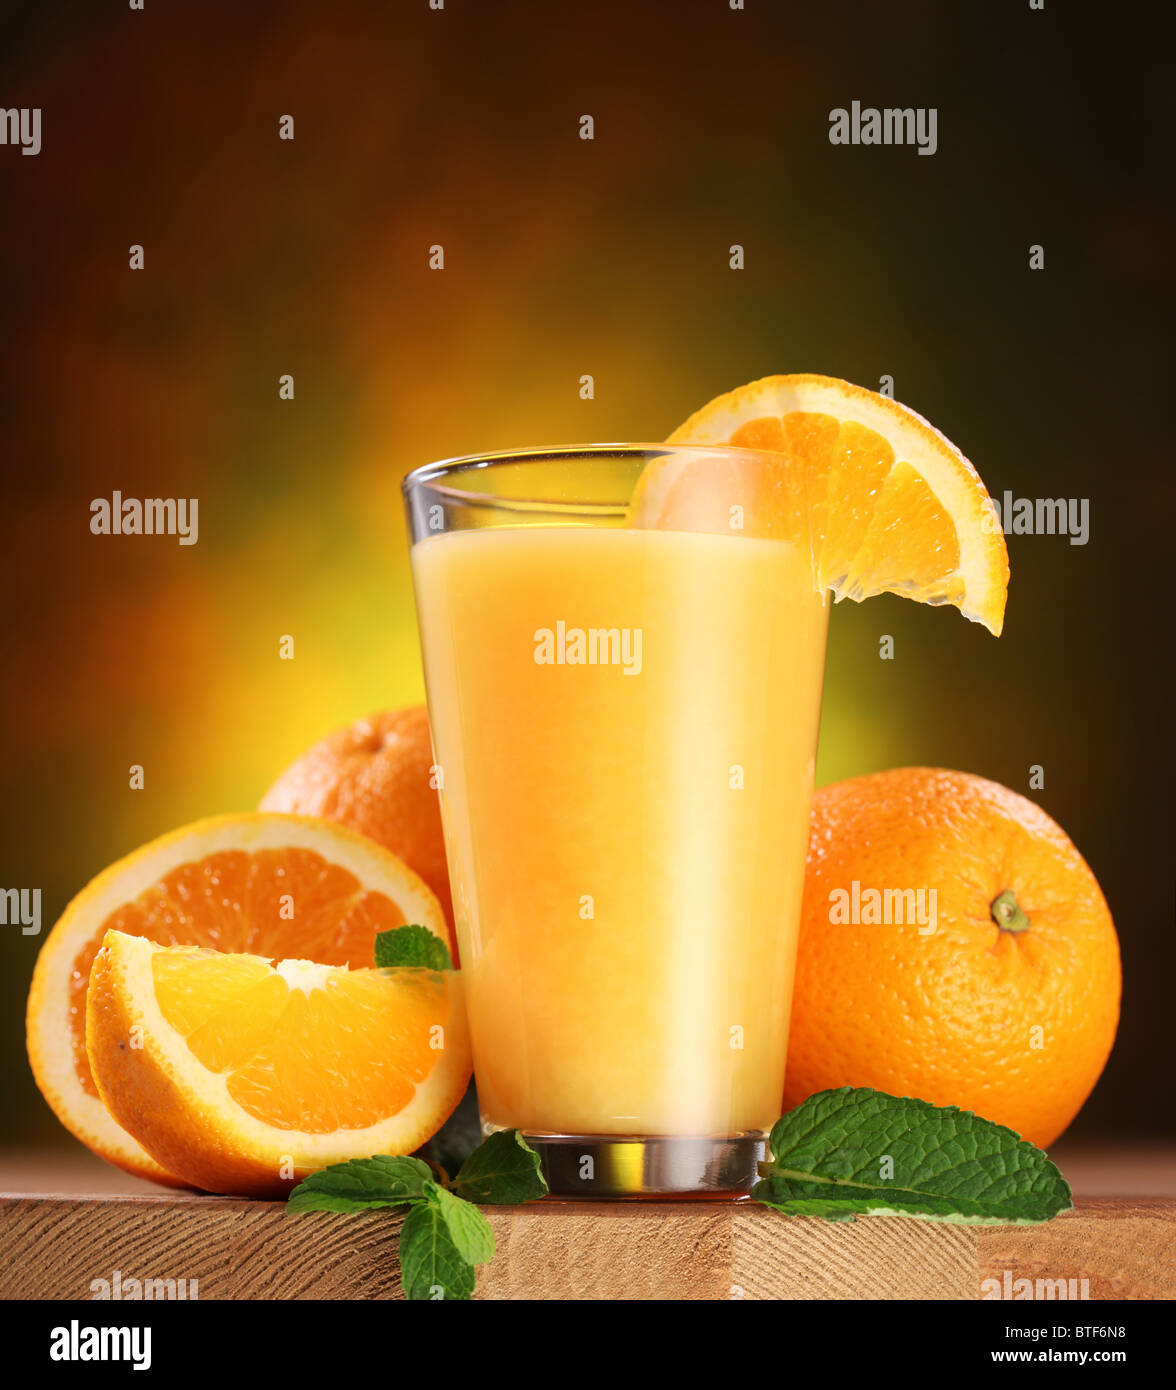 Still life: oranges and glass of juice on a wooden table. Stock Photo